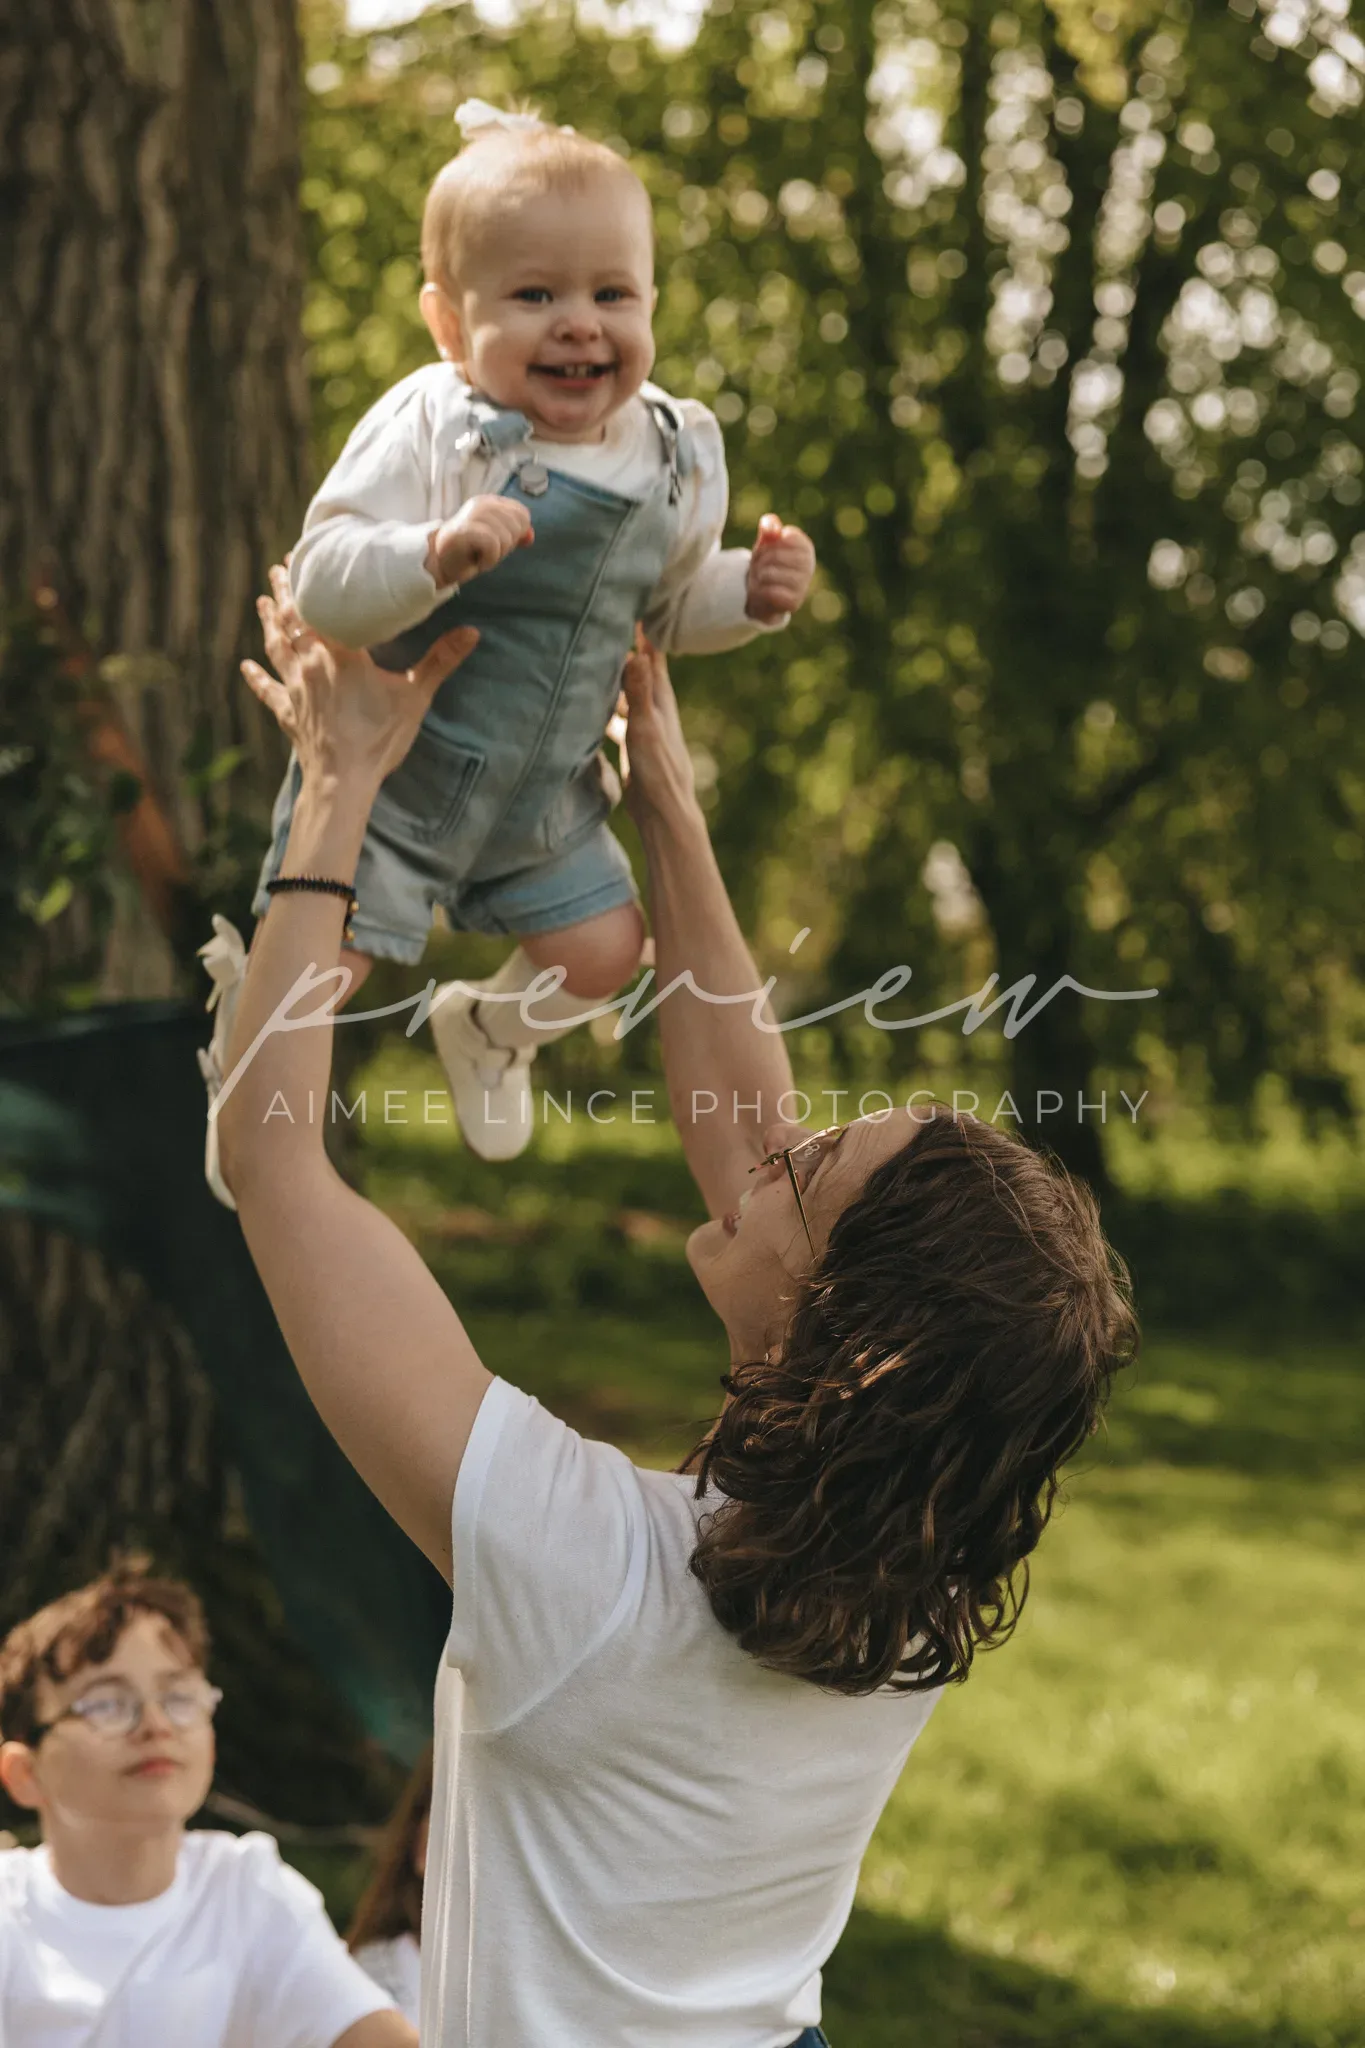 A joyful toddler in denim overalls is lifted high by a smiling woman in a white shirt, outdoors in a sunny park with trees. a young boy watches from the background.